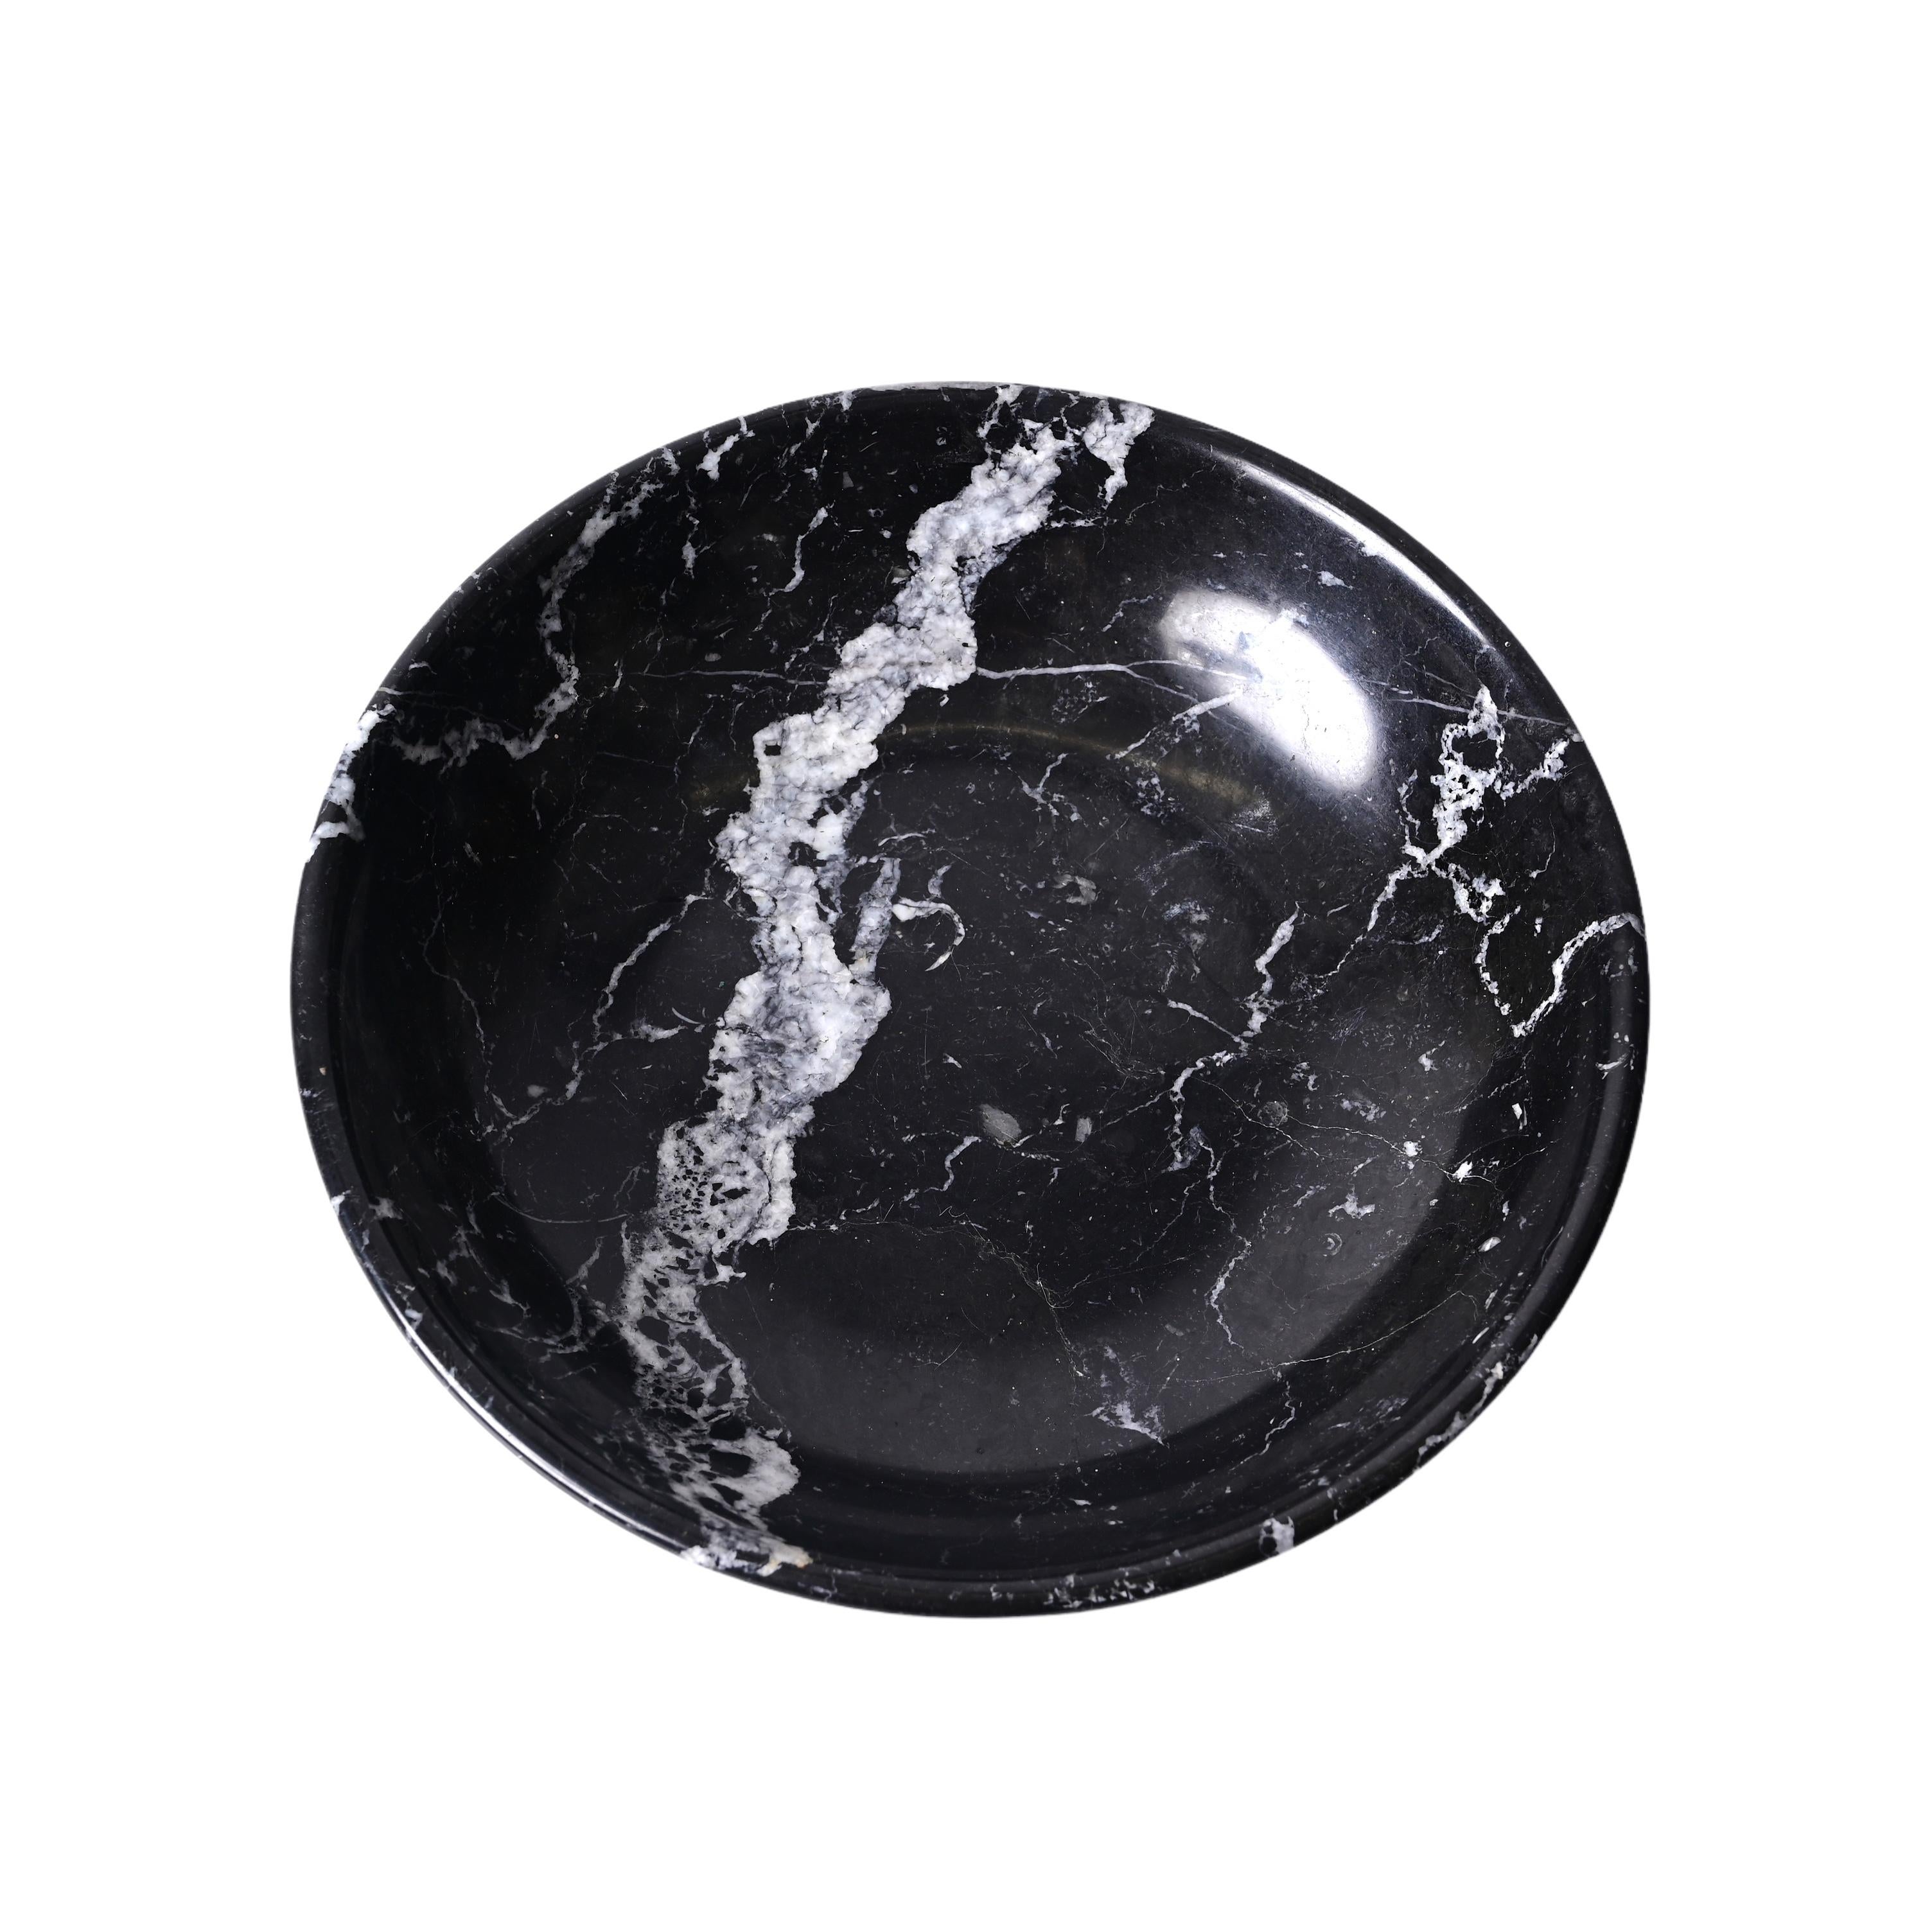 Midcentury Black Marble with White Grains Round Italian Decorative Bowl, 1950s For Sale 2